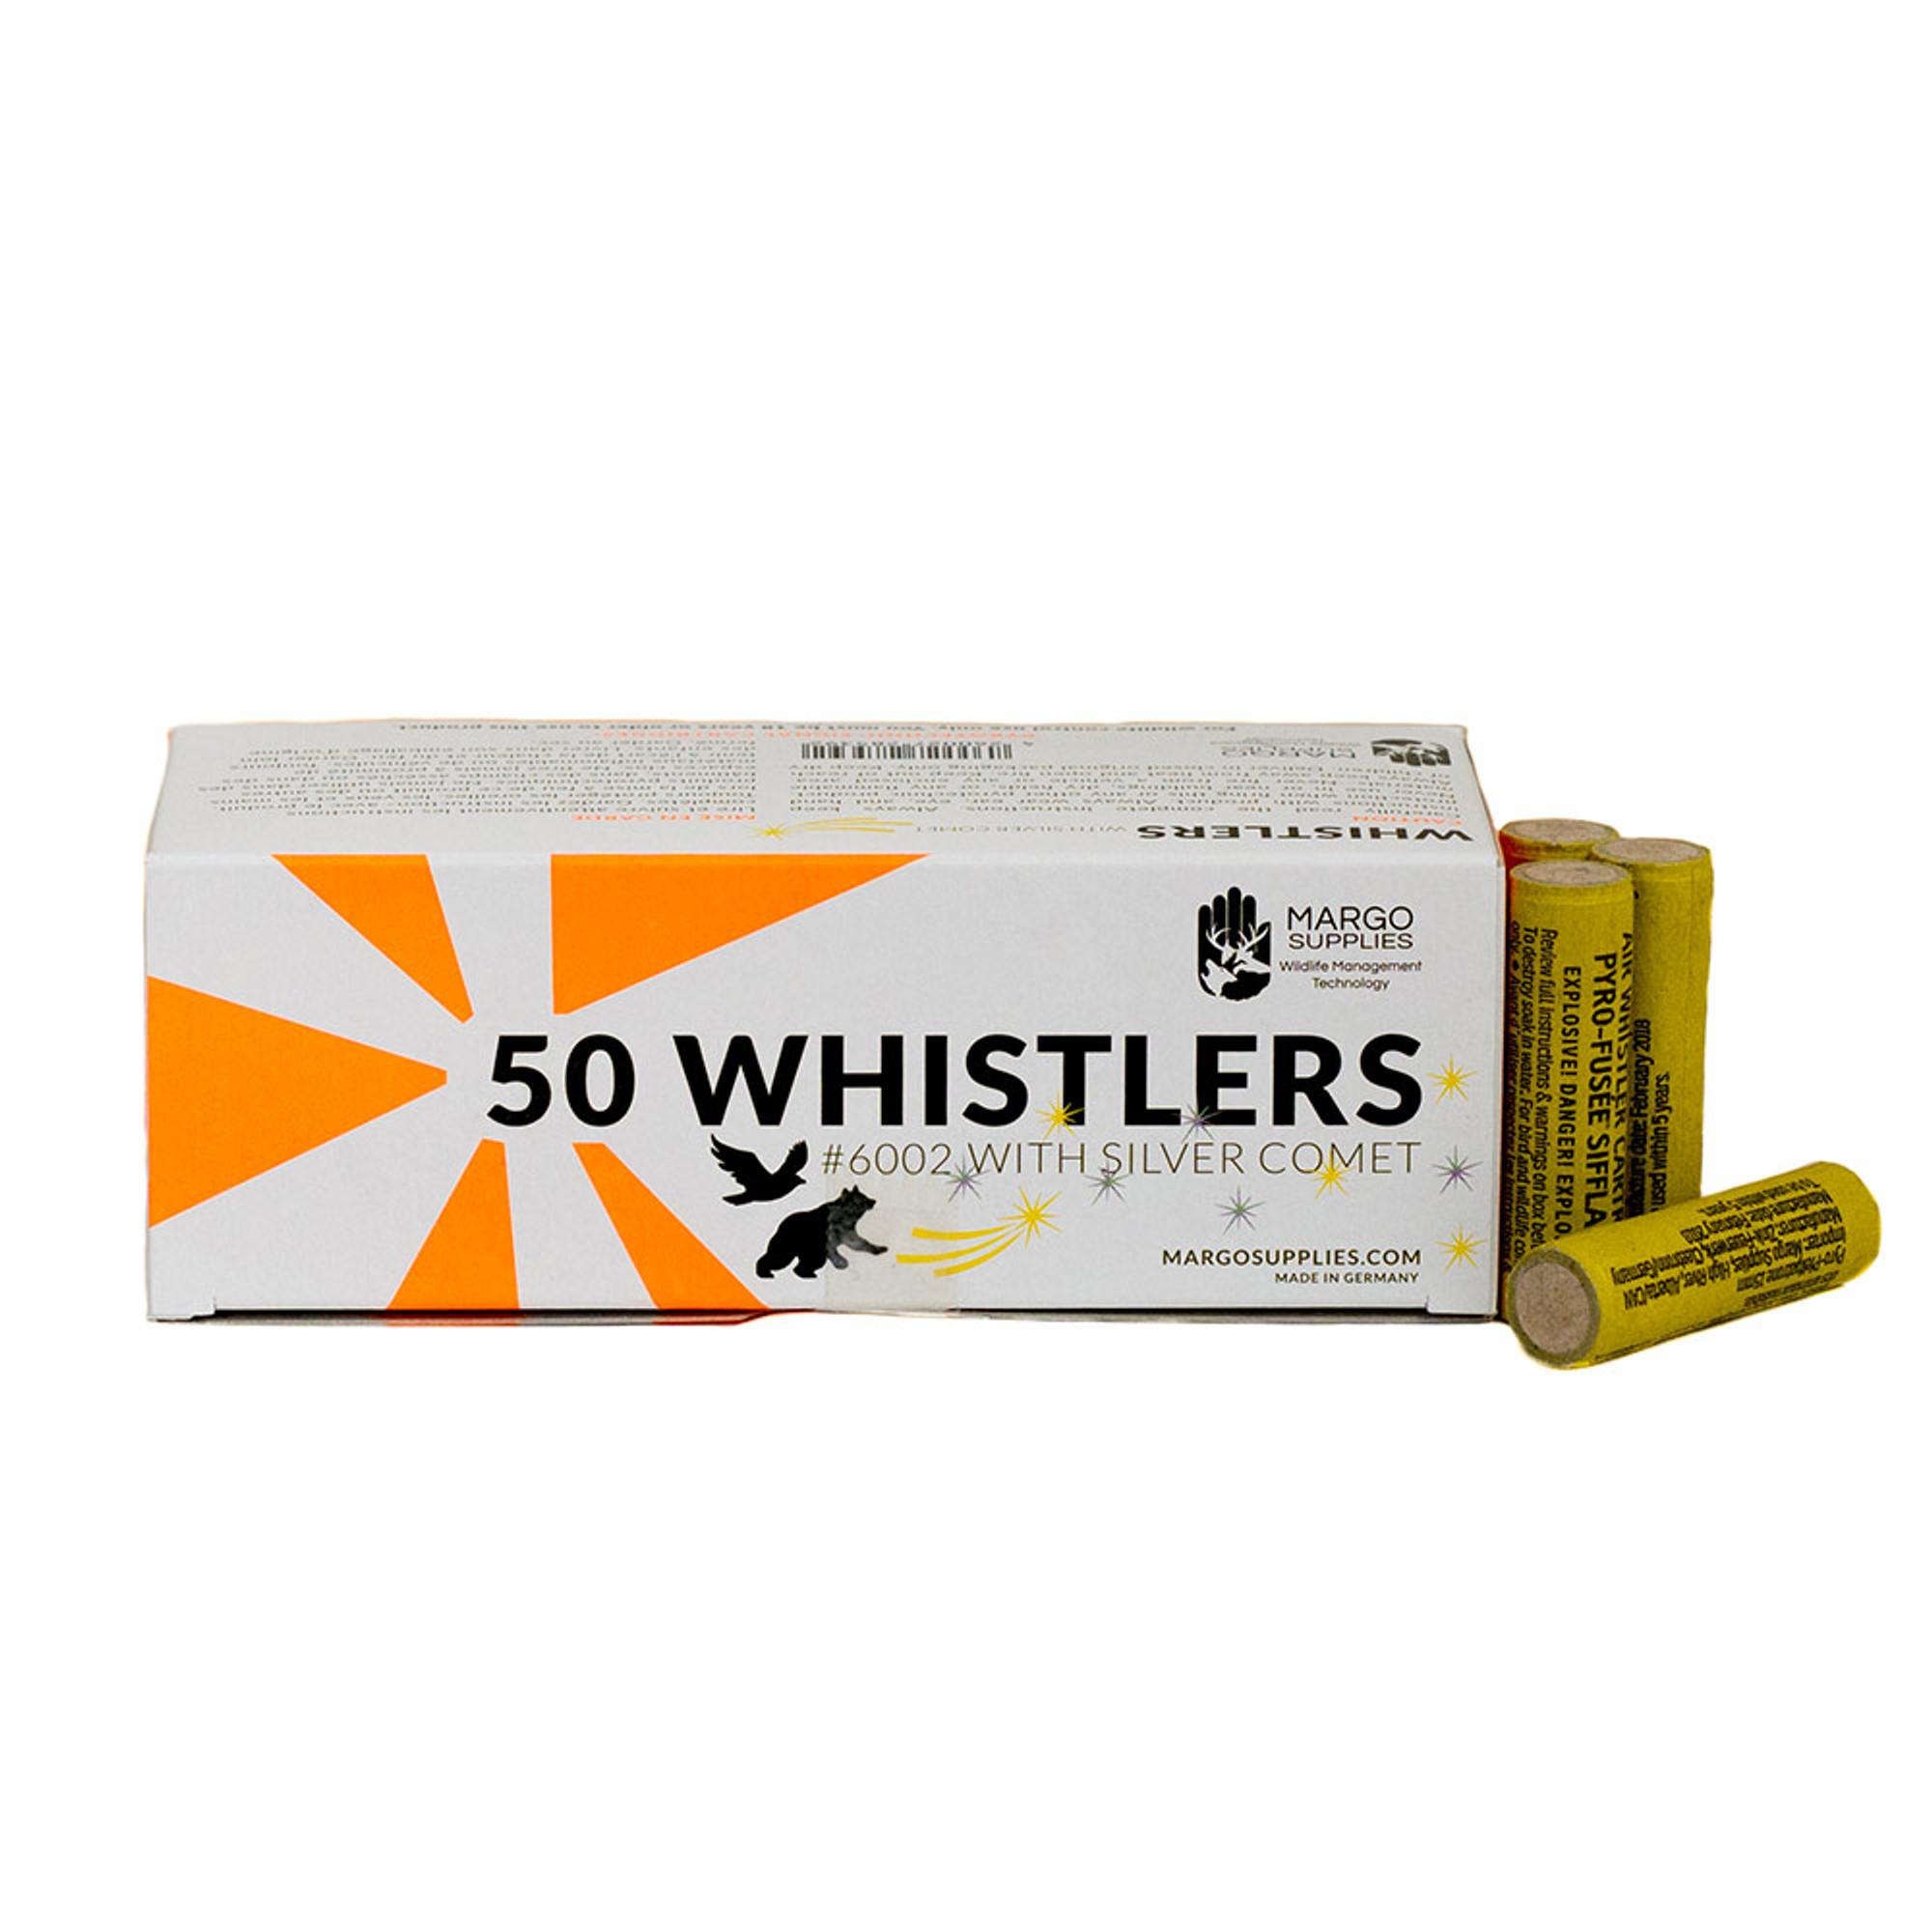 Whistlers w/Silver Comet - 50 Box